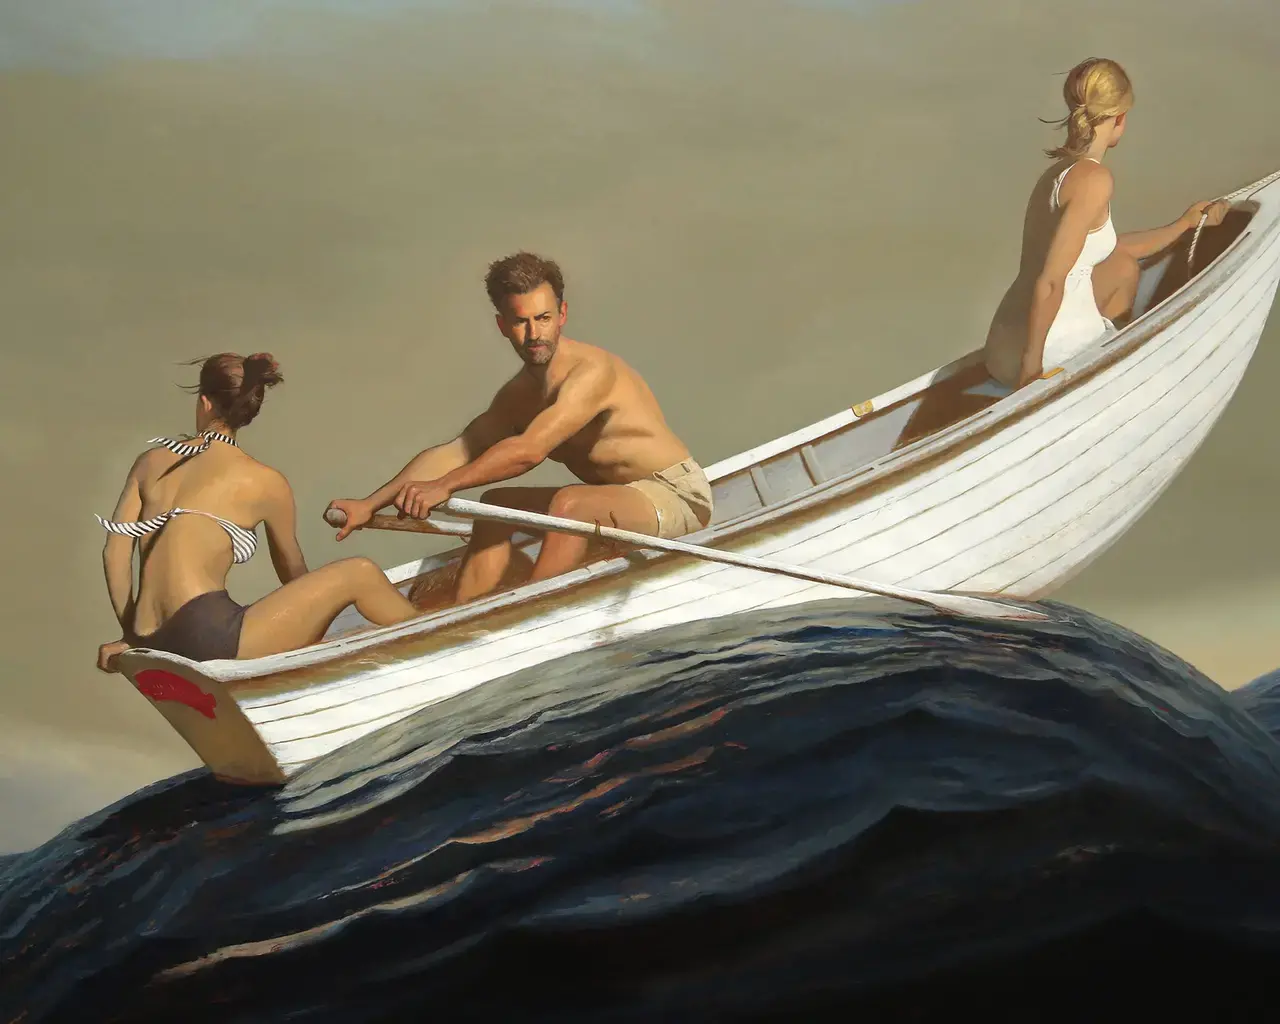 Bo Bartlett, The Promised Land, 2015, 88 x 120 inches, oil on linen. Photo courtesy of the artist.